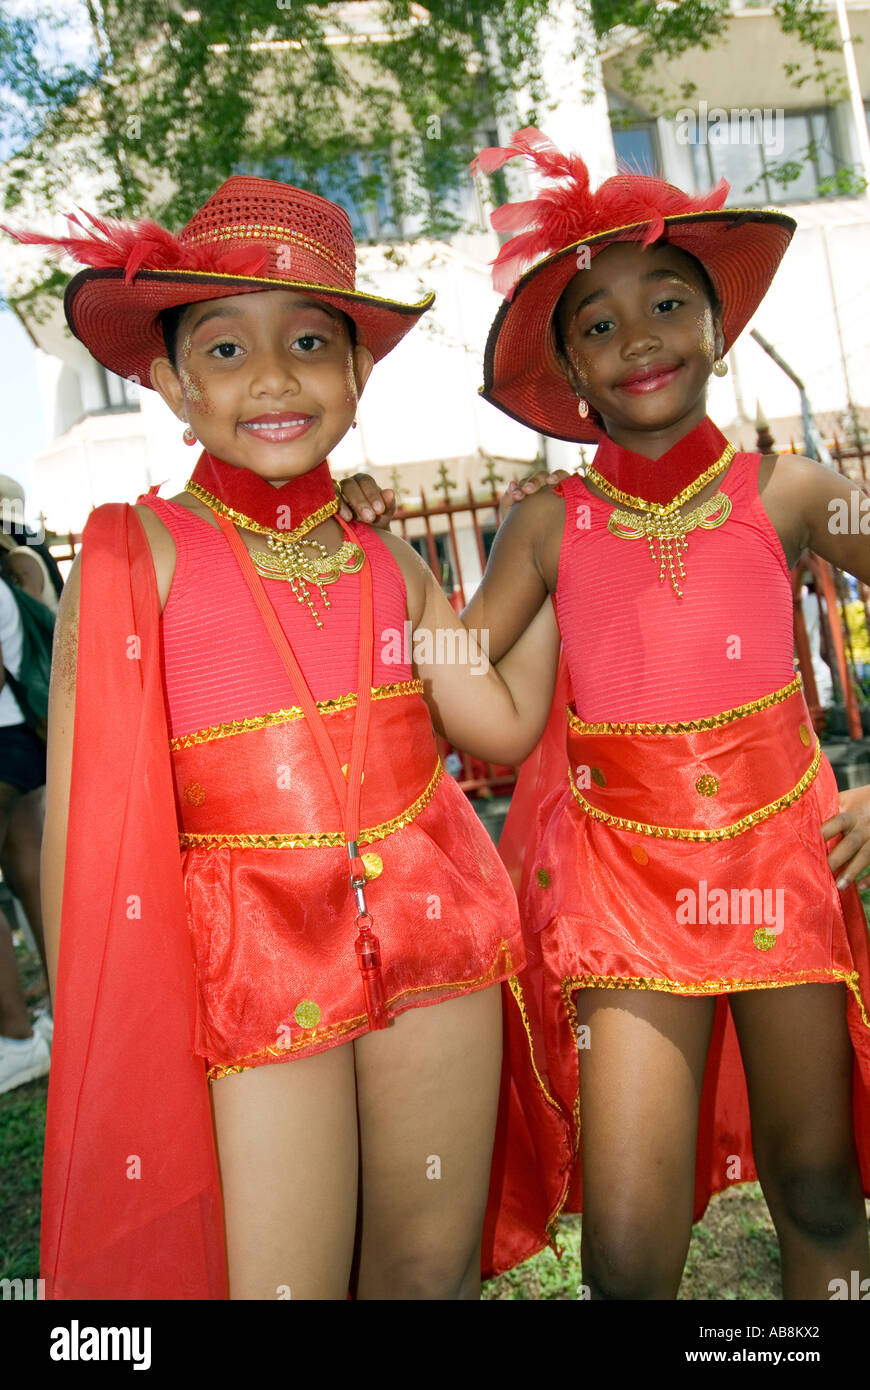 West Indies Trinidad Carnival Port of Spain  Kids in colorful costumes Kiddies Carnival Parade Stock Photo